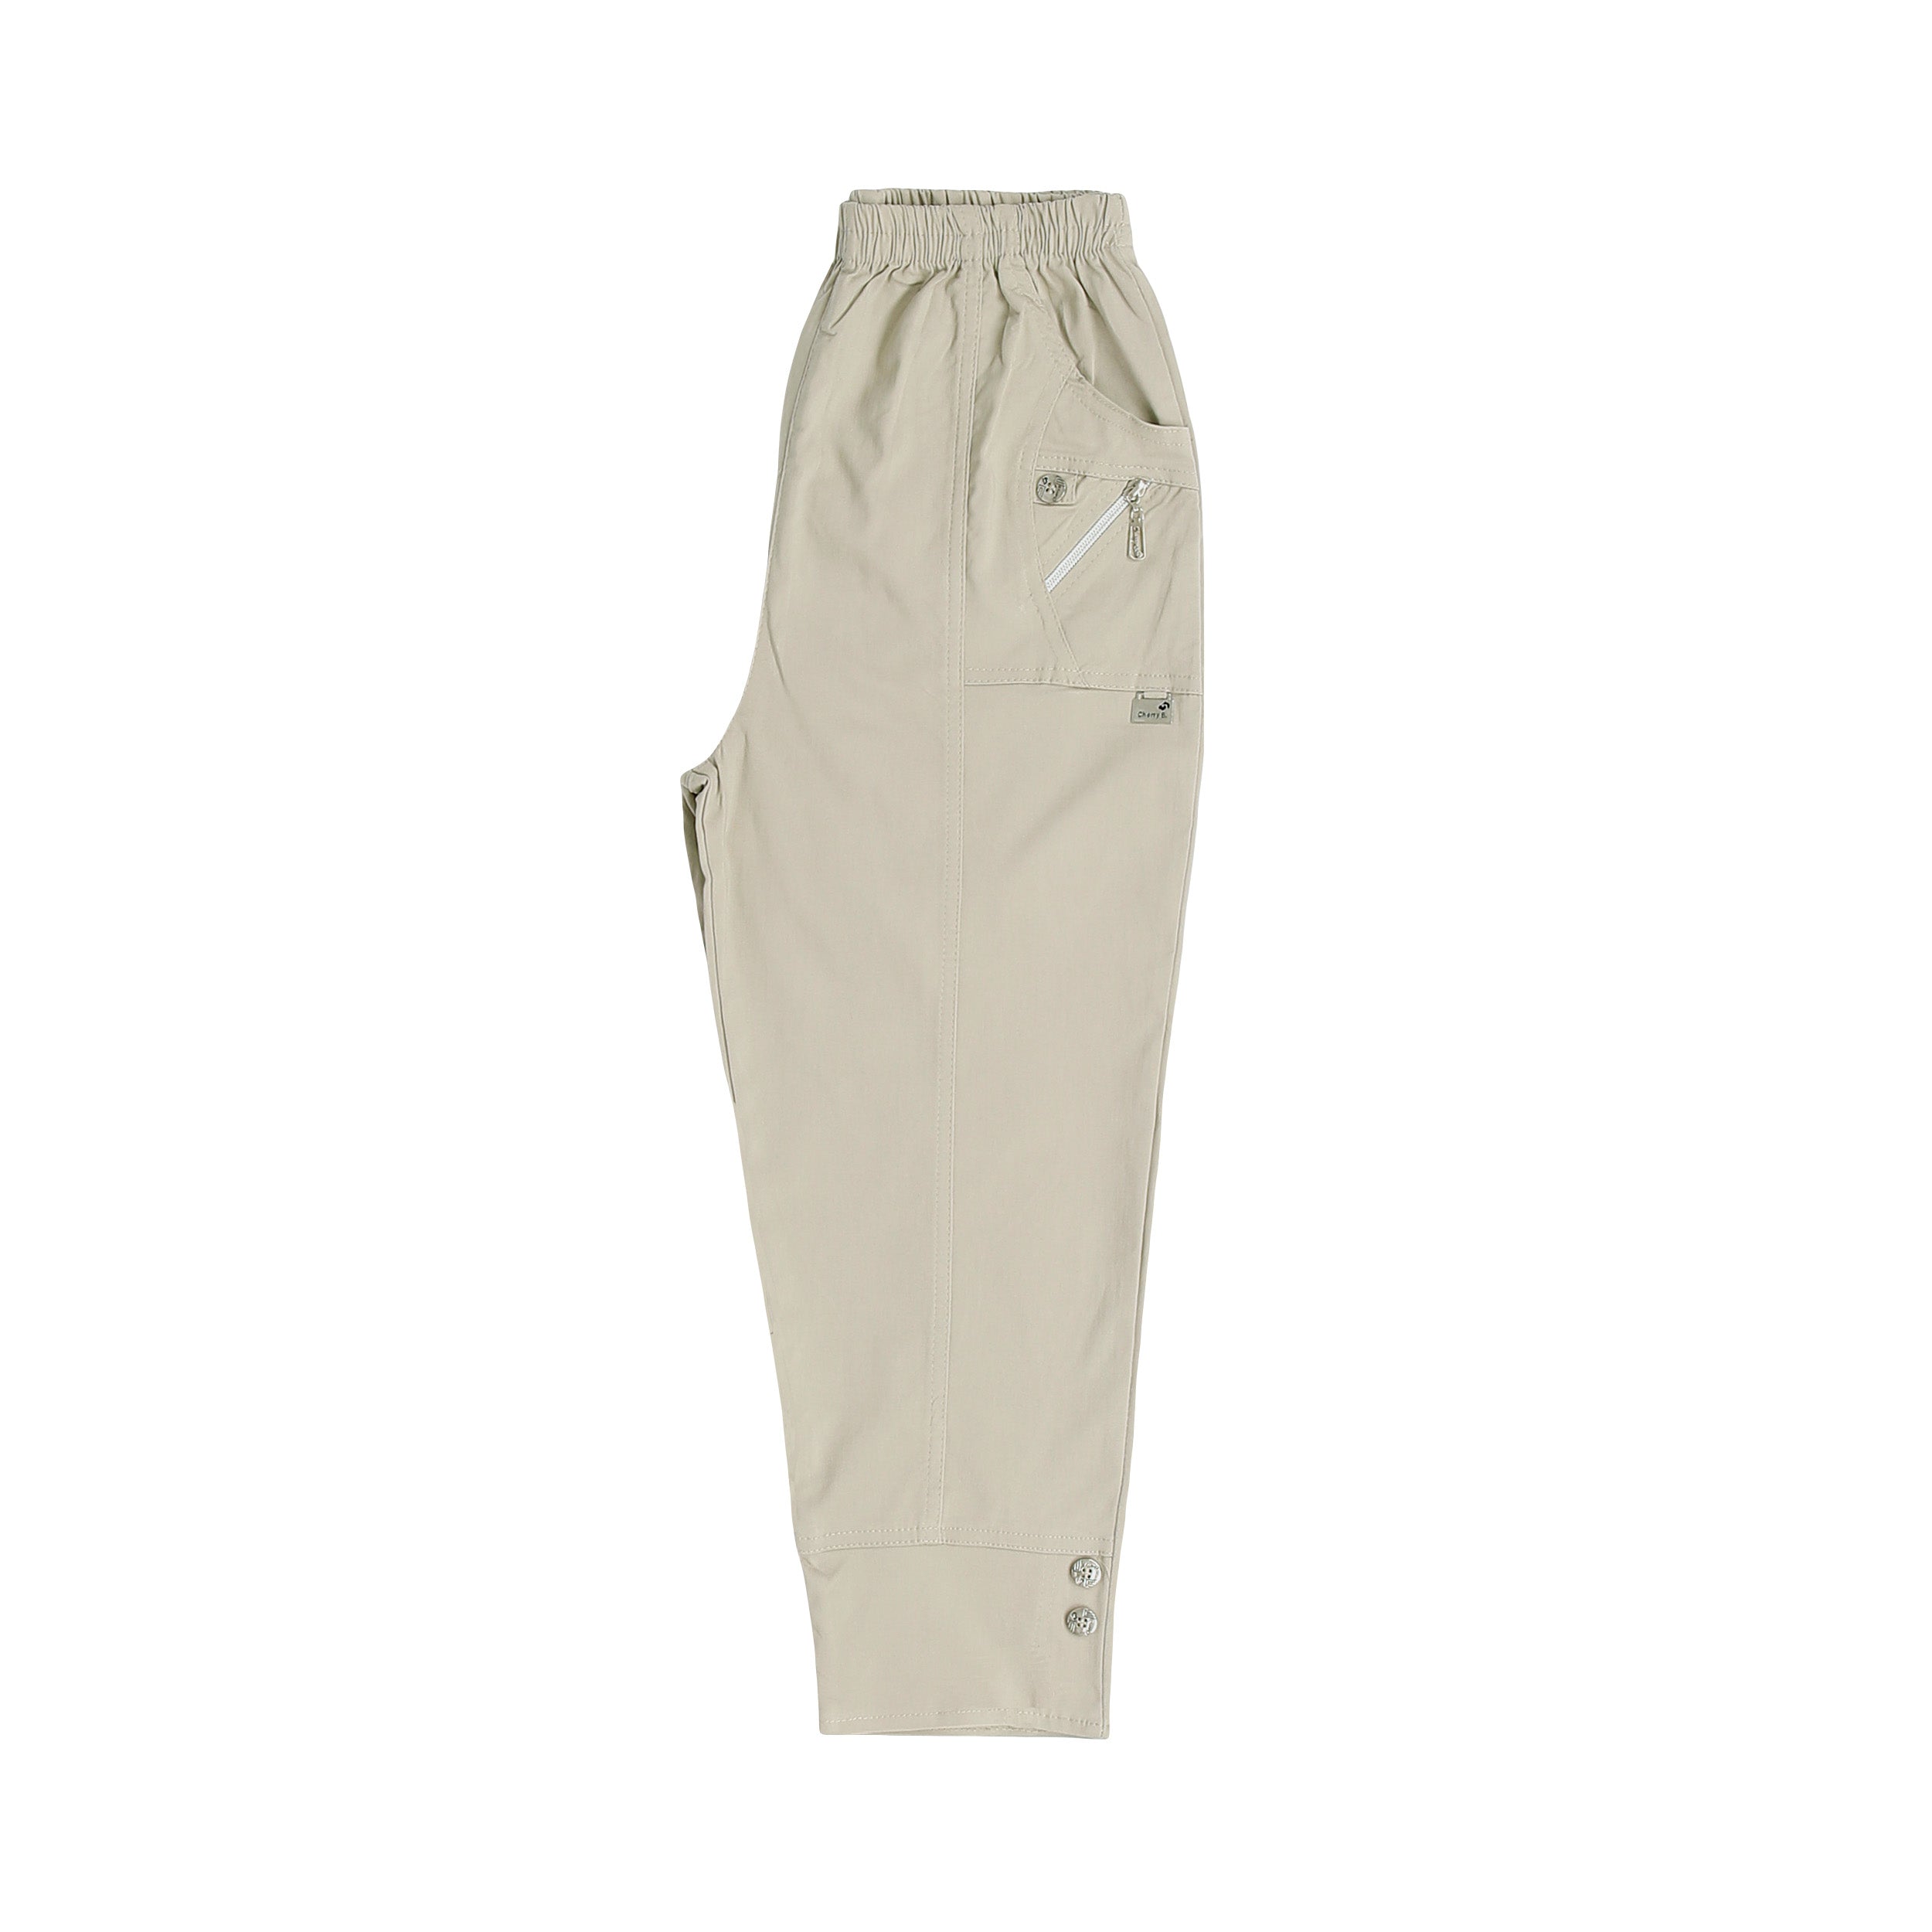 Cherry Berry 3/4 Stretch Trousers £11.99 Size 10-22 – Jonathan